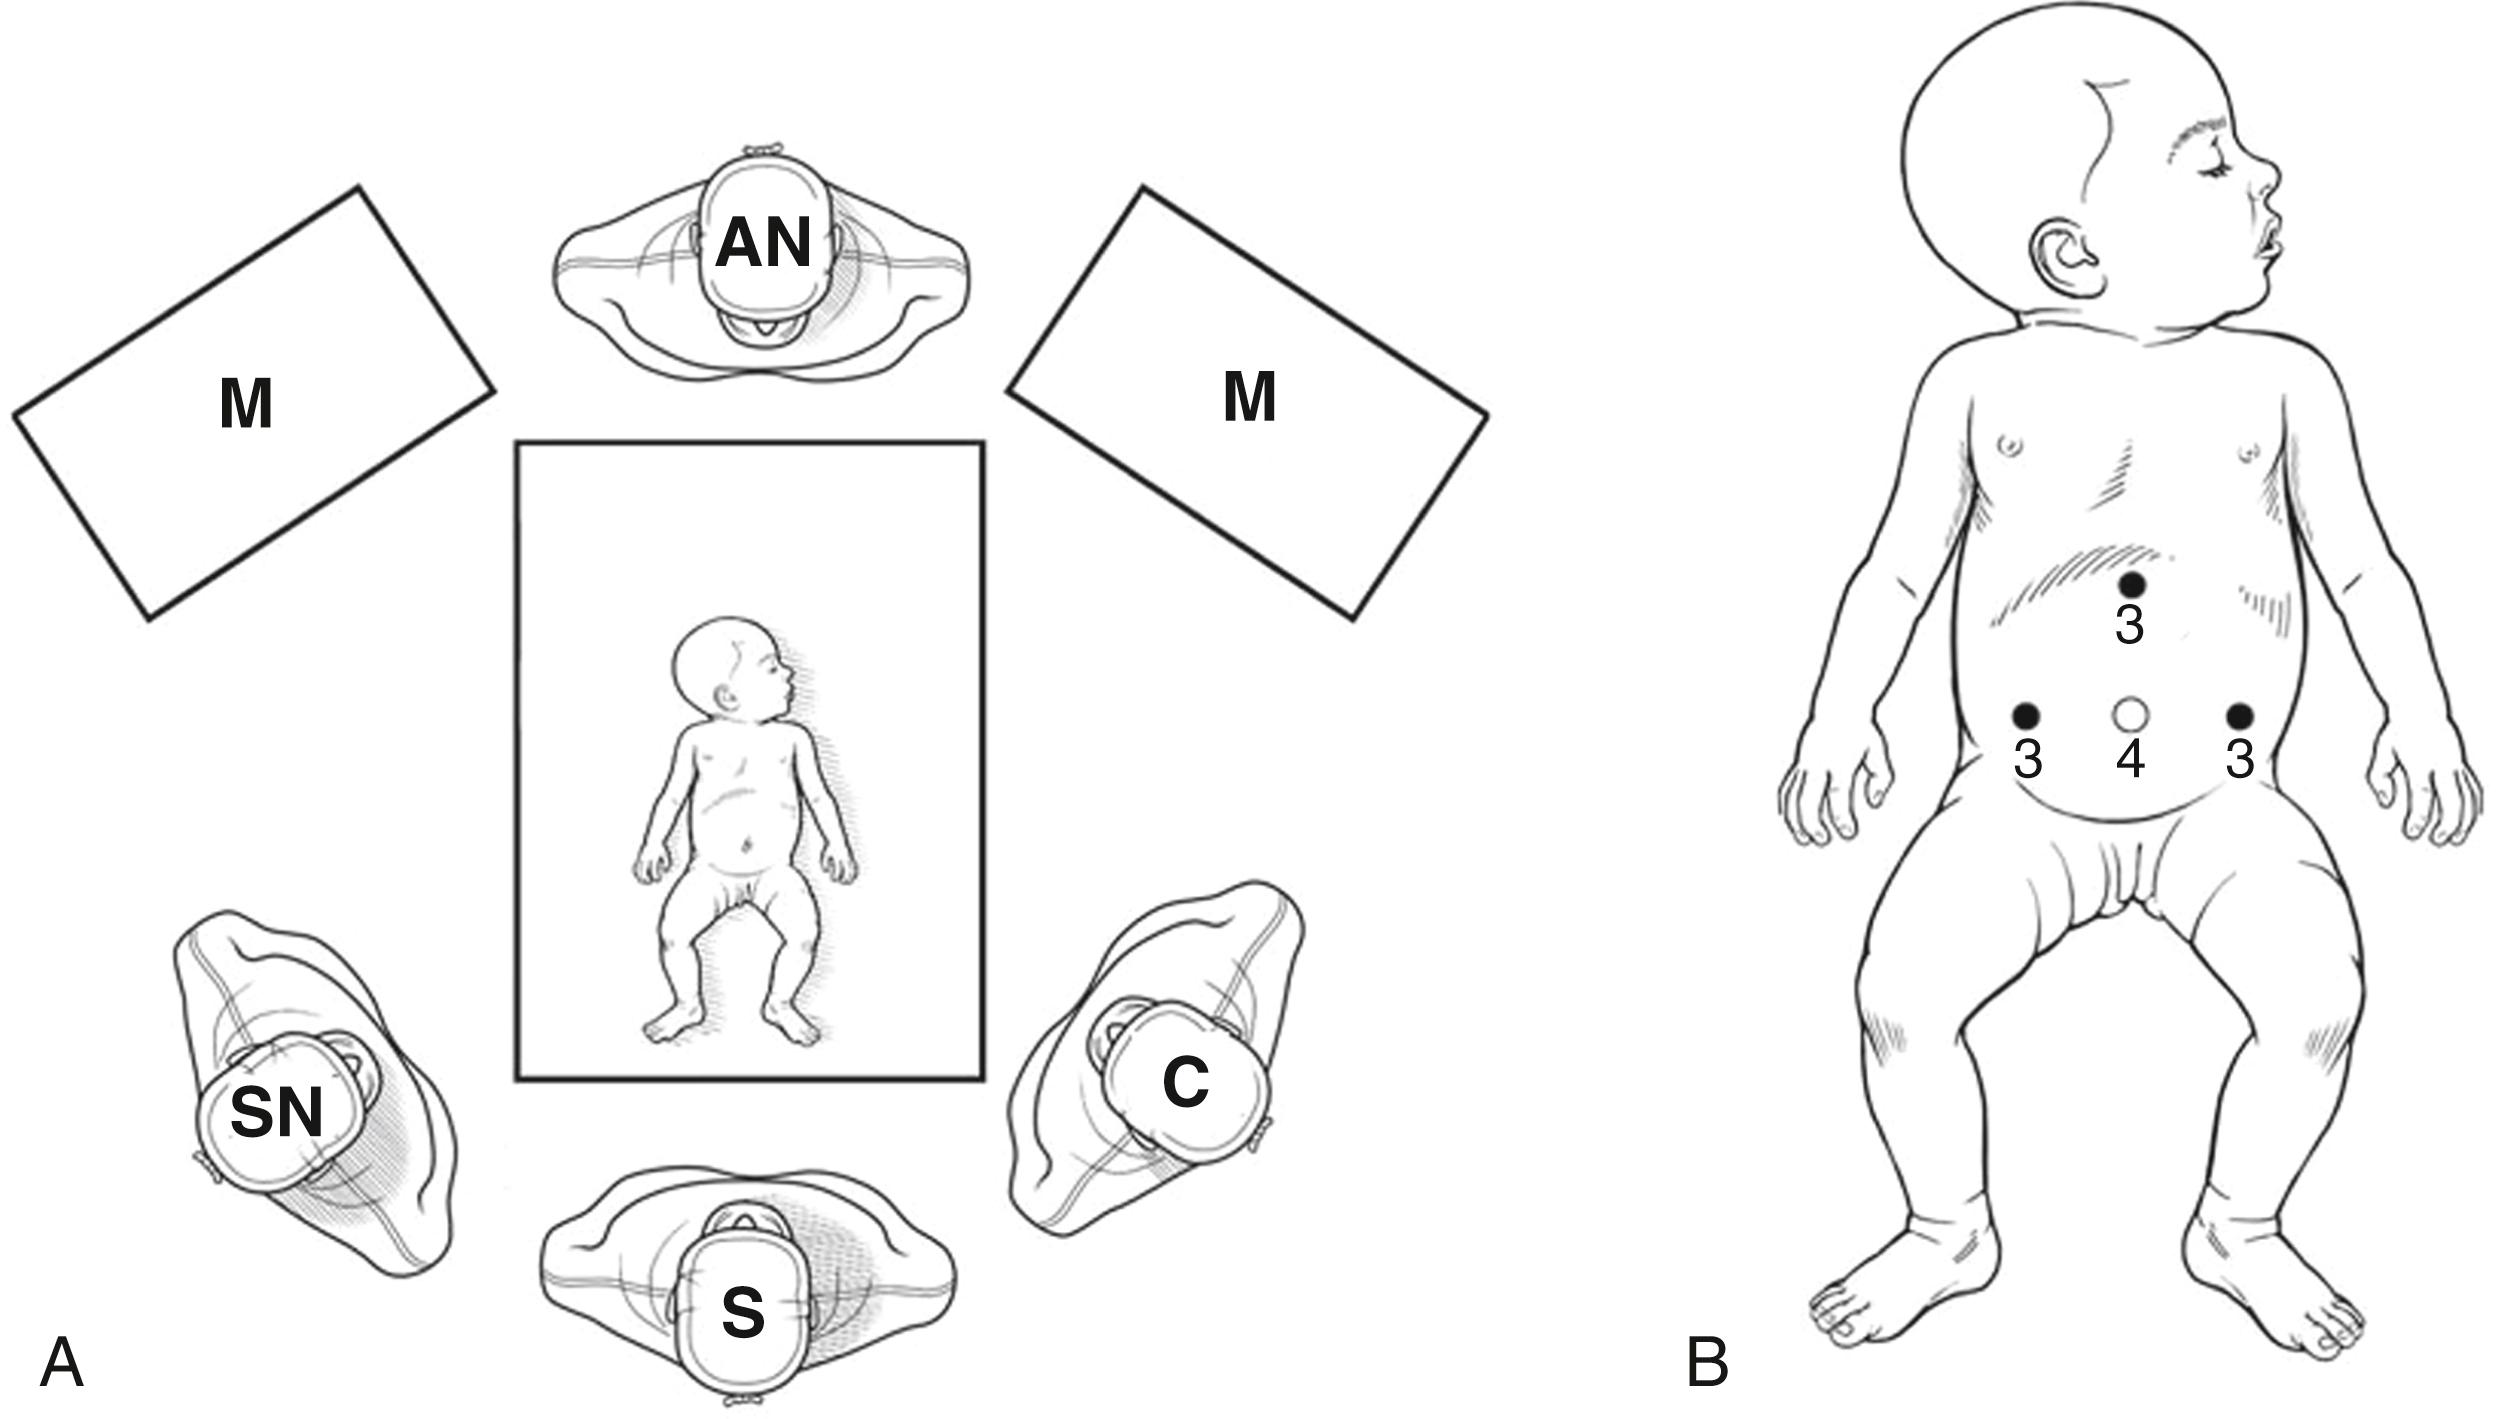 Fig. 6-2, A, The surgeon (S) stands at the foot of the operating table with the camera holder (C) to the surgeon’s left and scrub nurse (SN) to the right. The infant is positioned at the end of the operating table. AN, anesthesiologist; M, monitor. B, The location and size (in millimeters) of the four ports are seen. The 3-mm subxiphoid port is optional for a liver retractor.